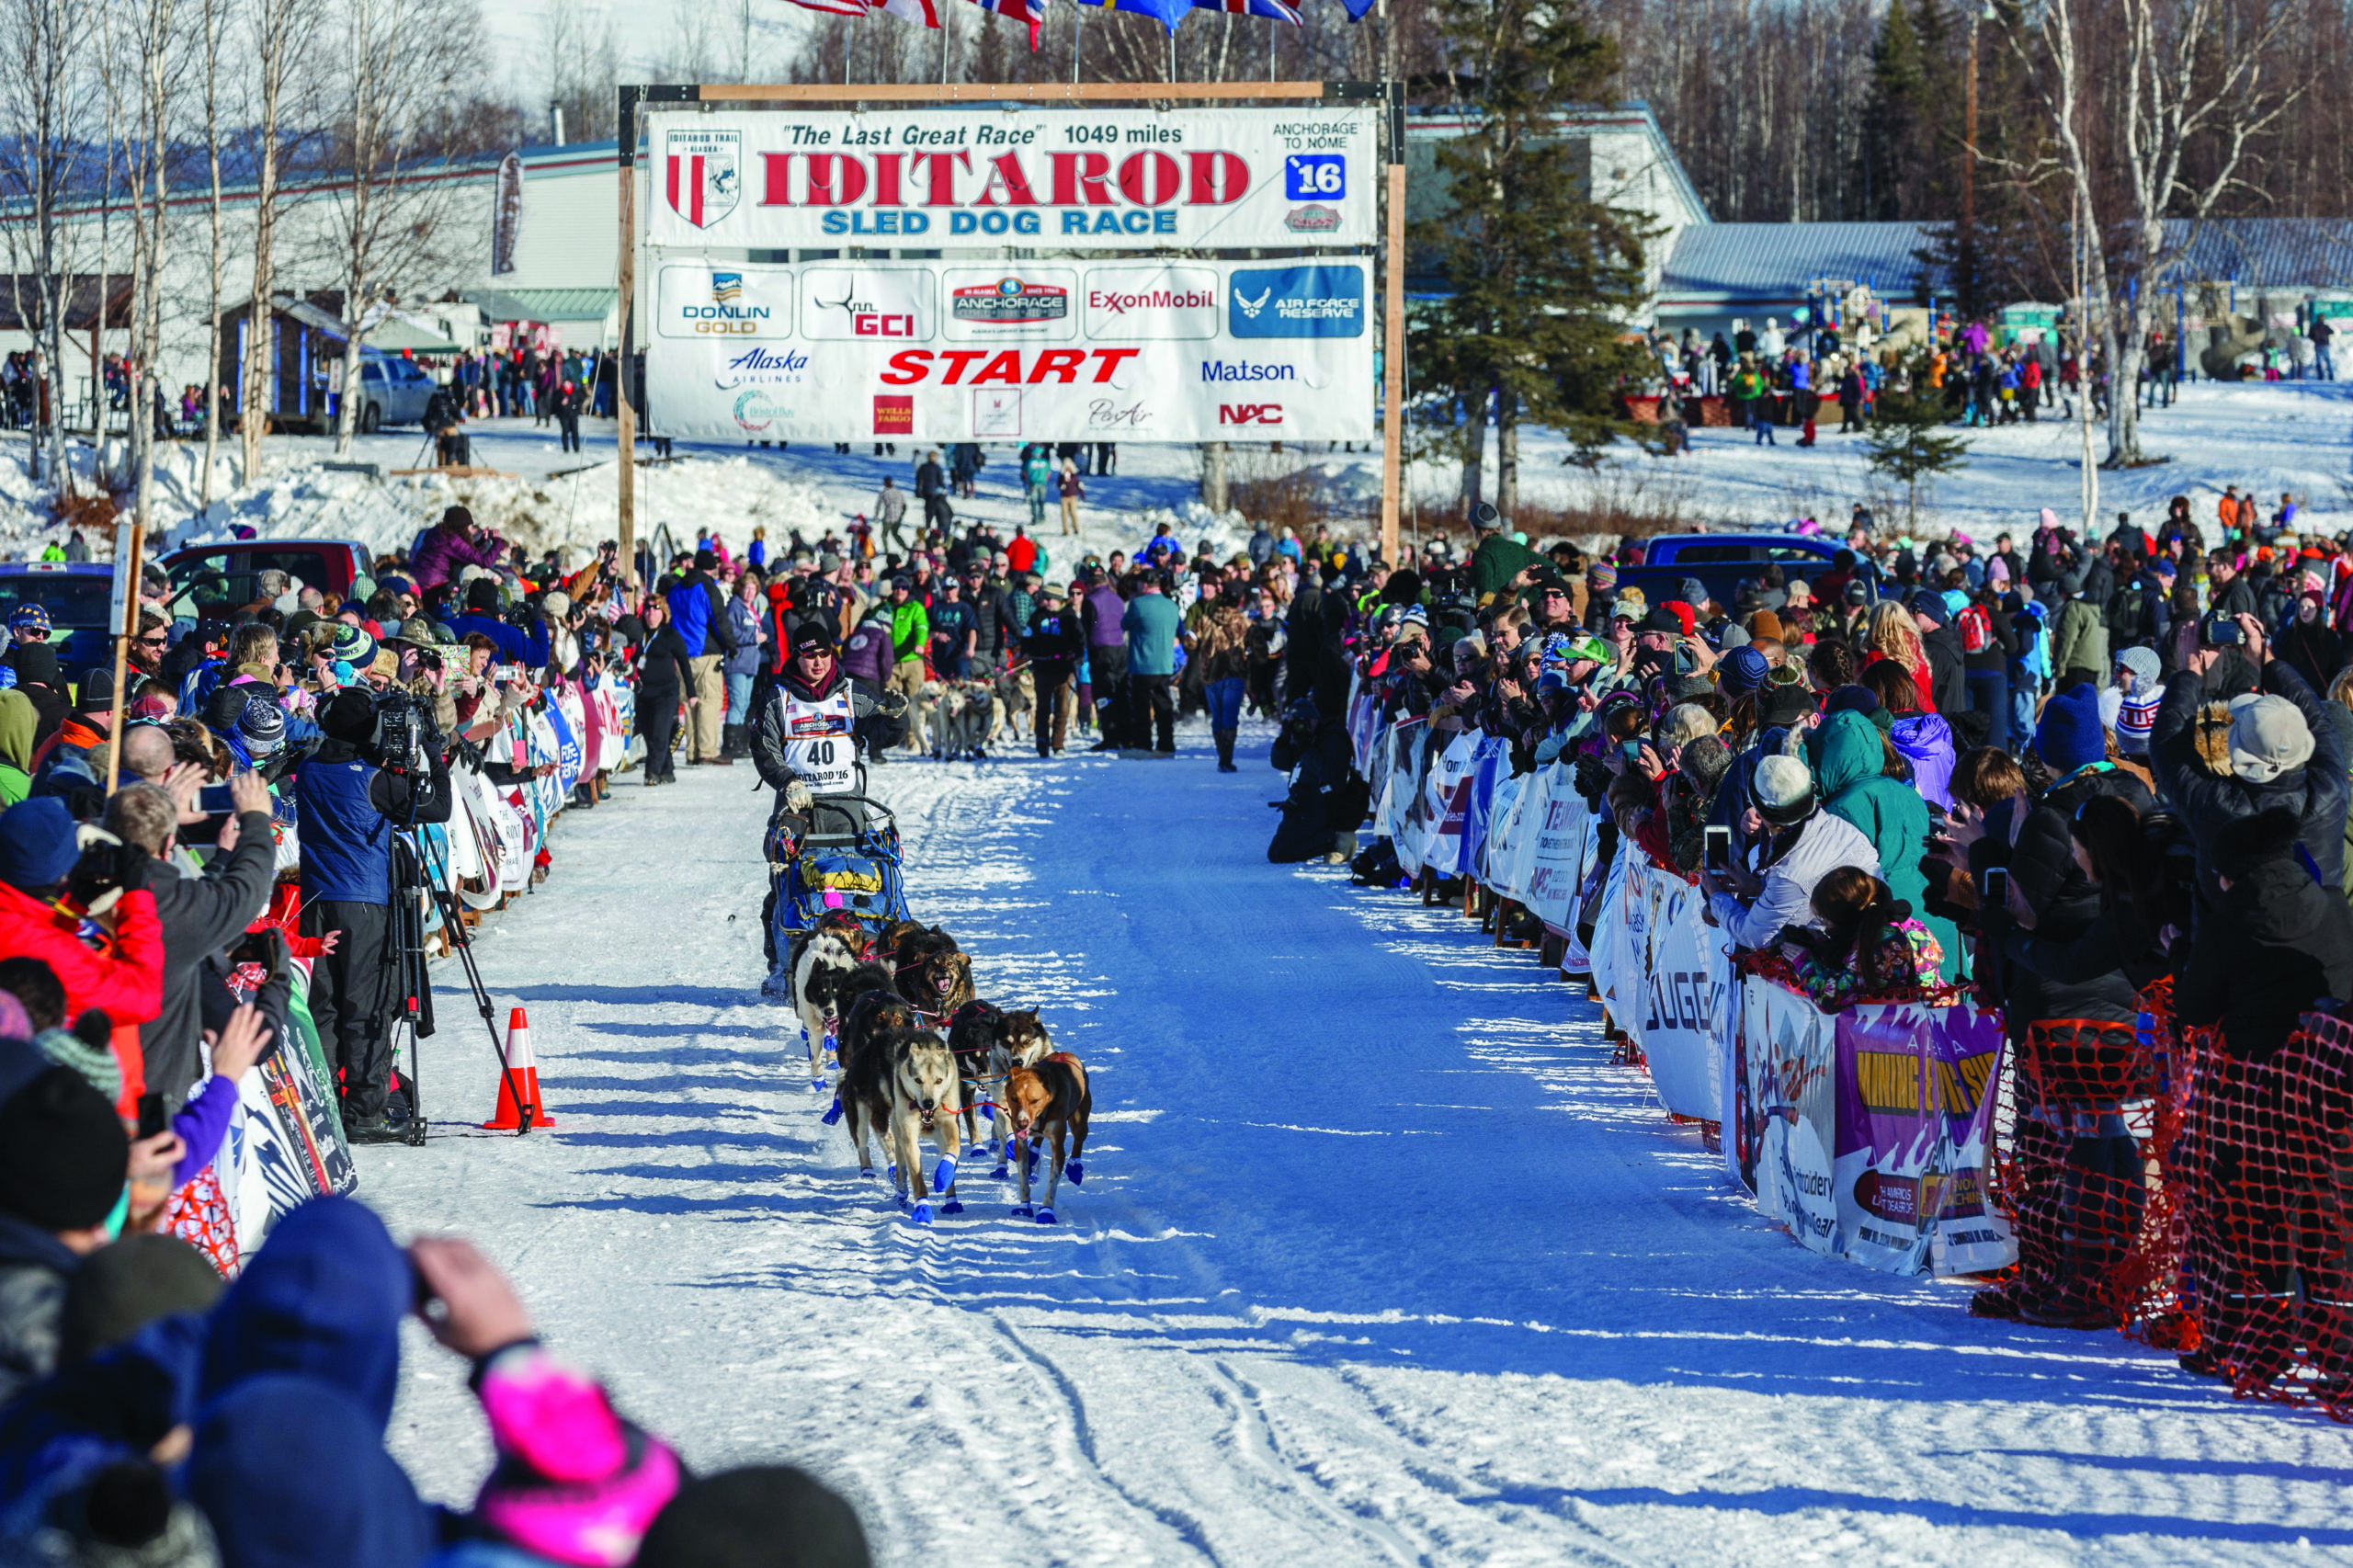 The crowd claps and cheers on Mike Williams Jr. as he leaves the start during the Ceremonial Start of the 2016 Iditarod.